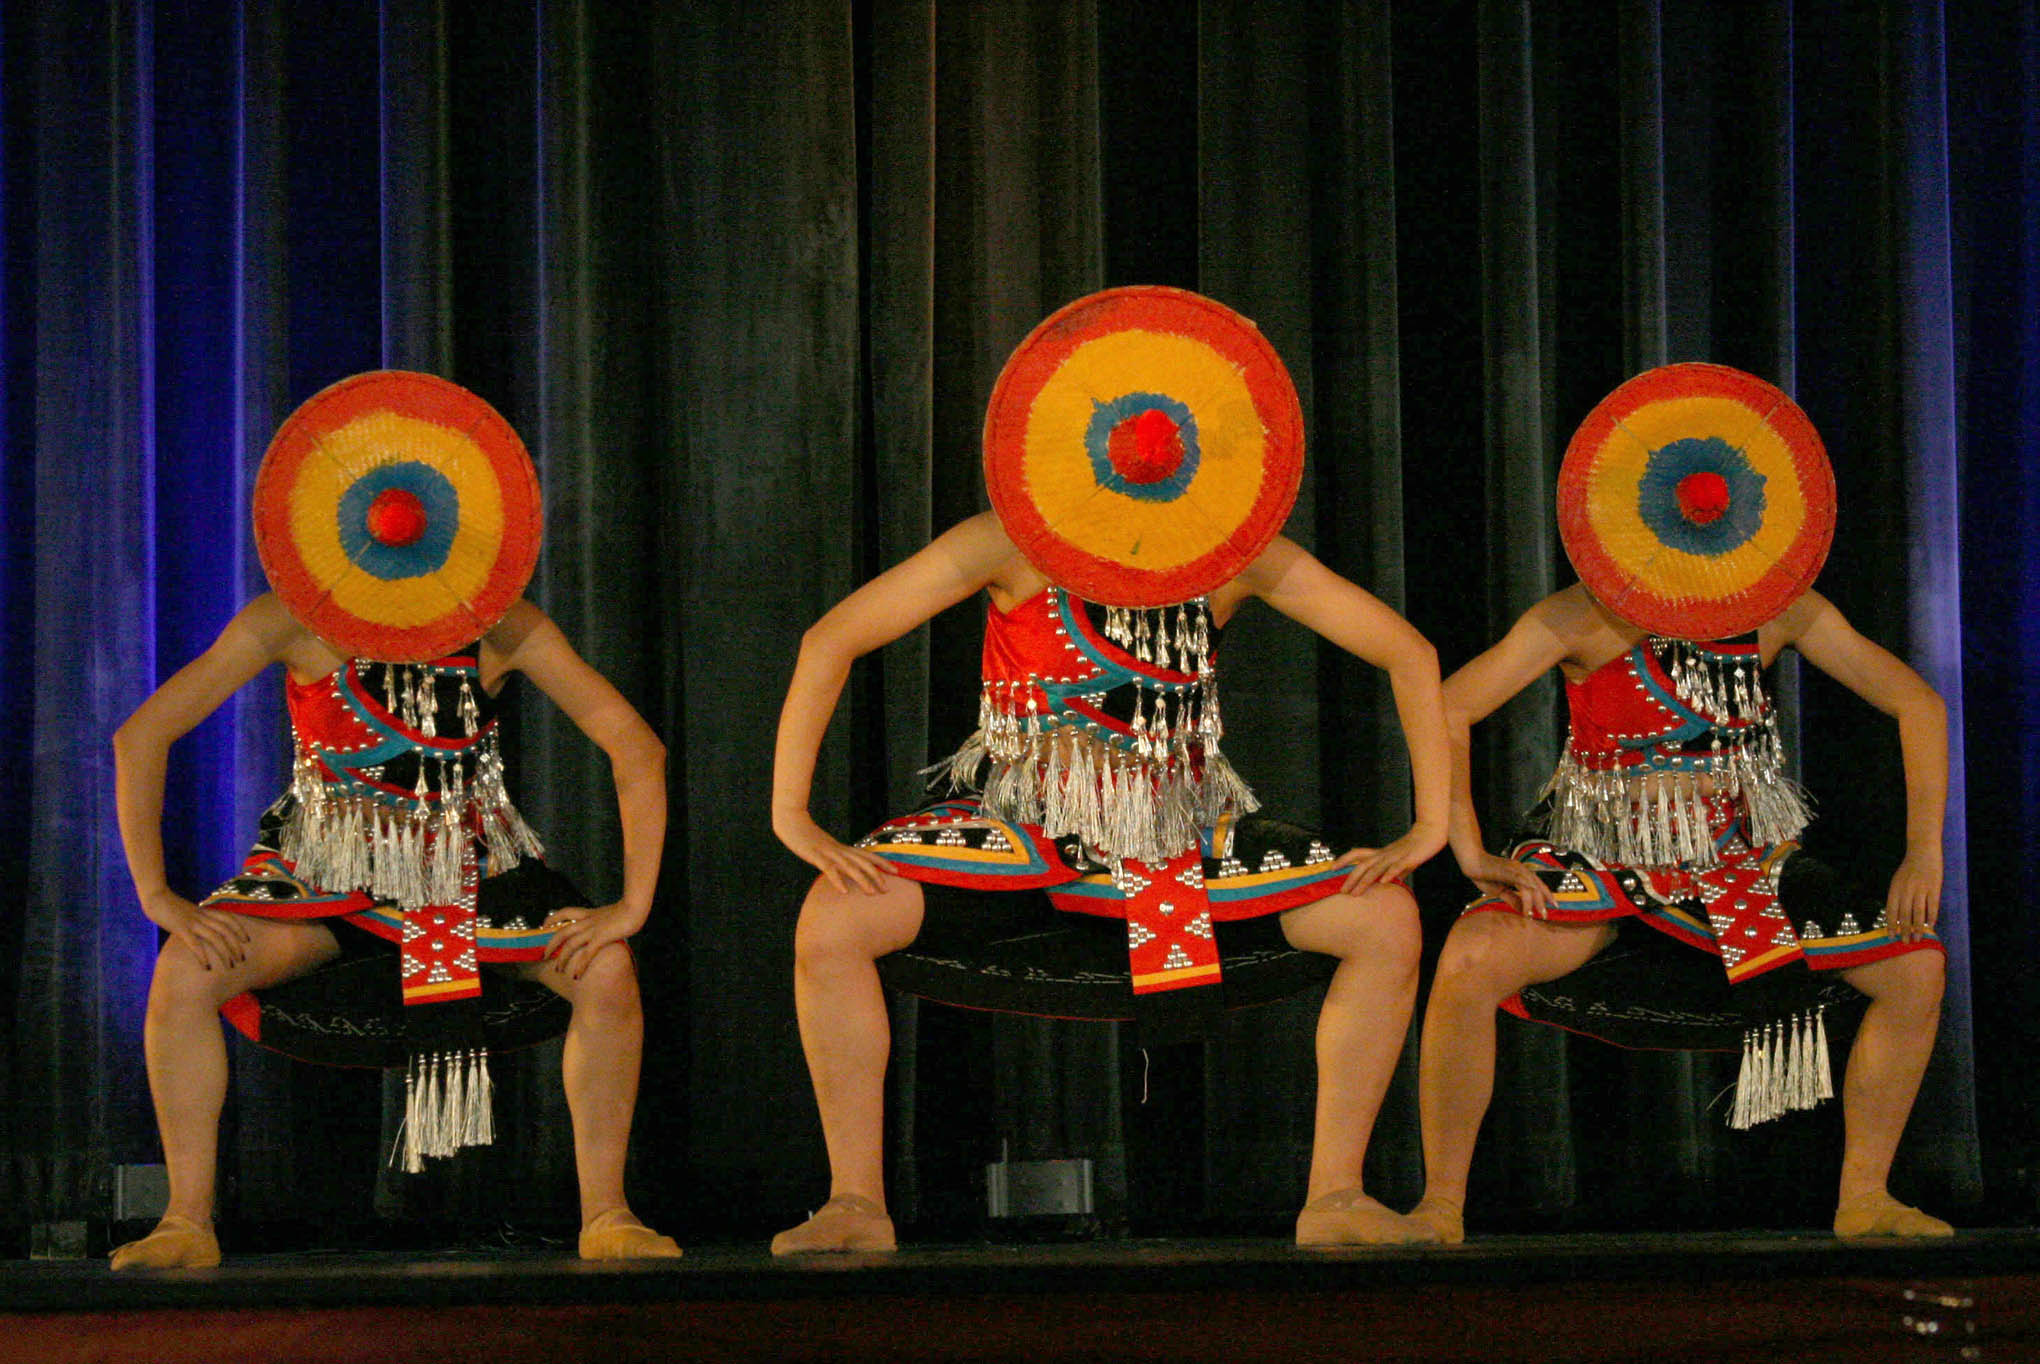 CCCC hosts Chinese cultural arts performance